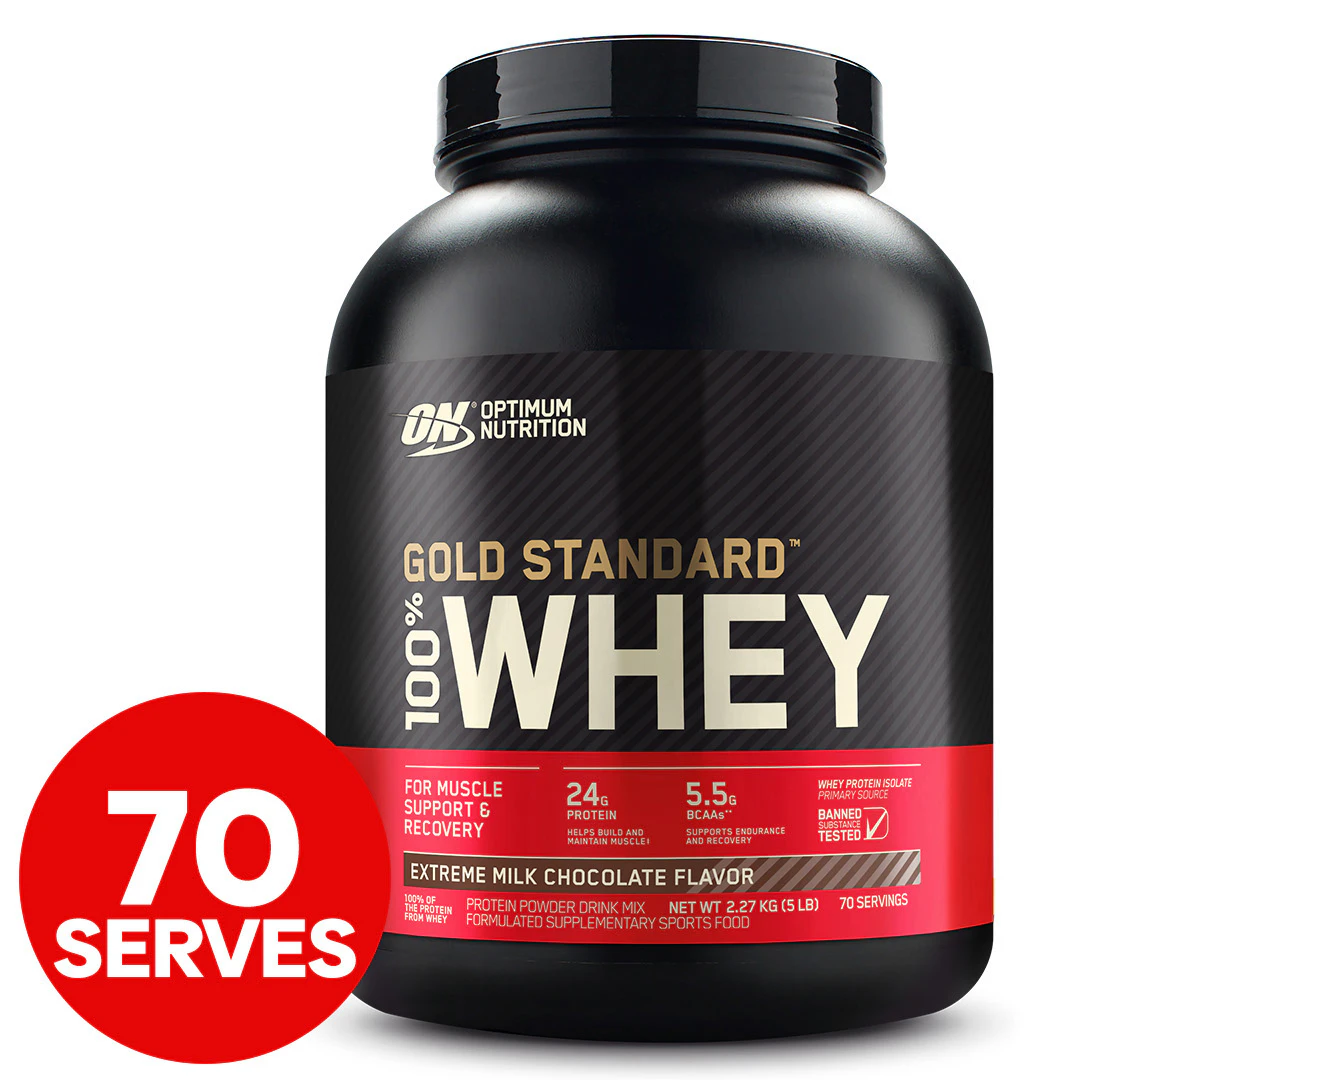 THE ONMYWHEY COMBO PACK - OnMyWhey